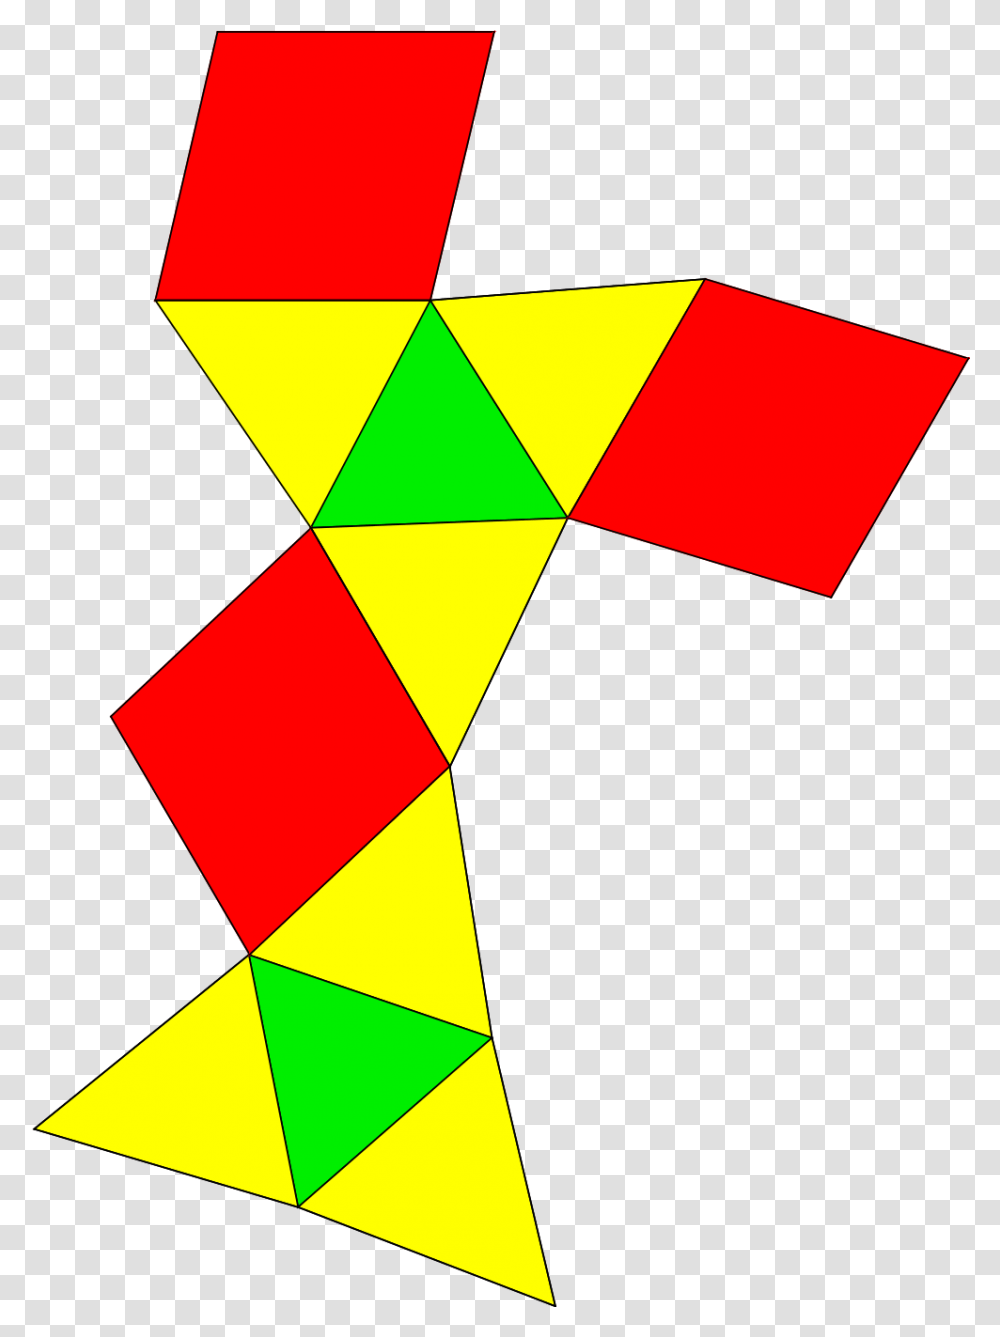 Net Of Rectified Triangular Prism, Triangle, Light Transparent Png